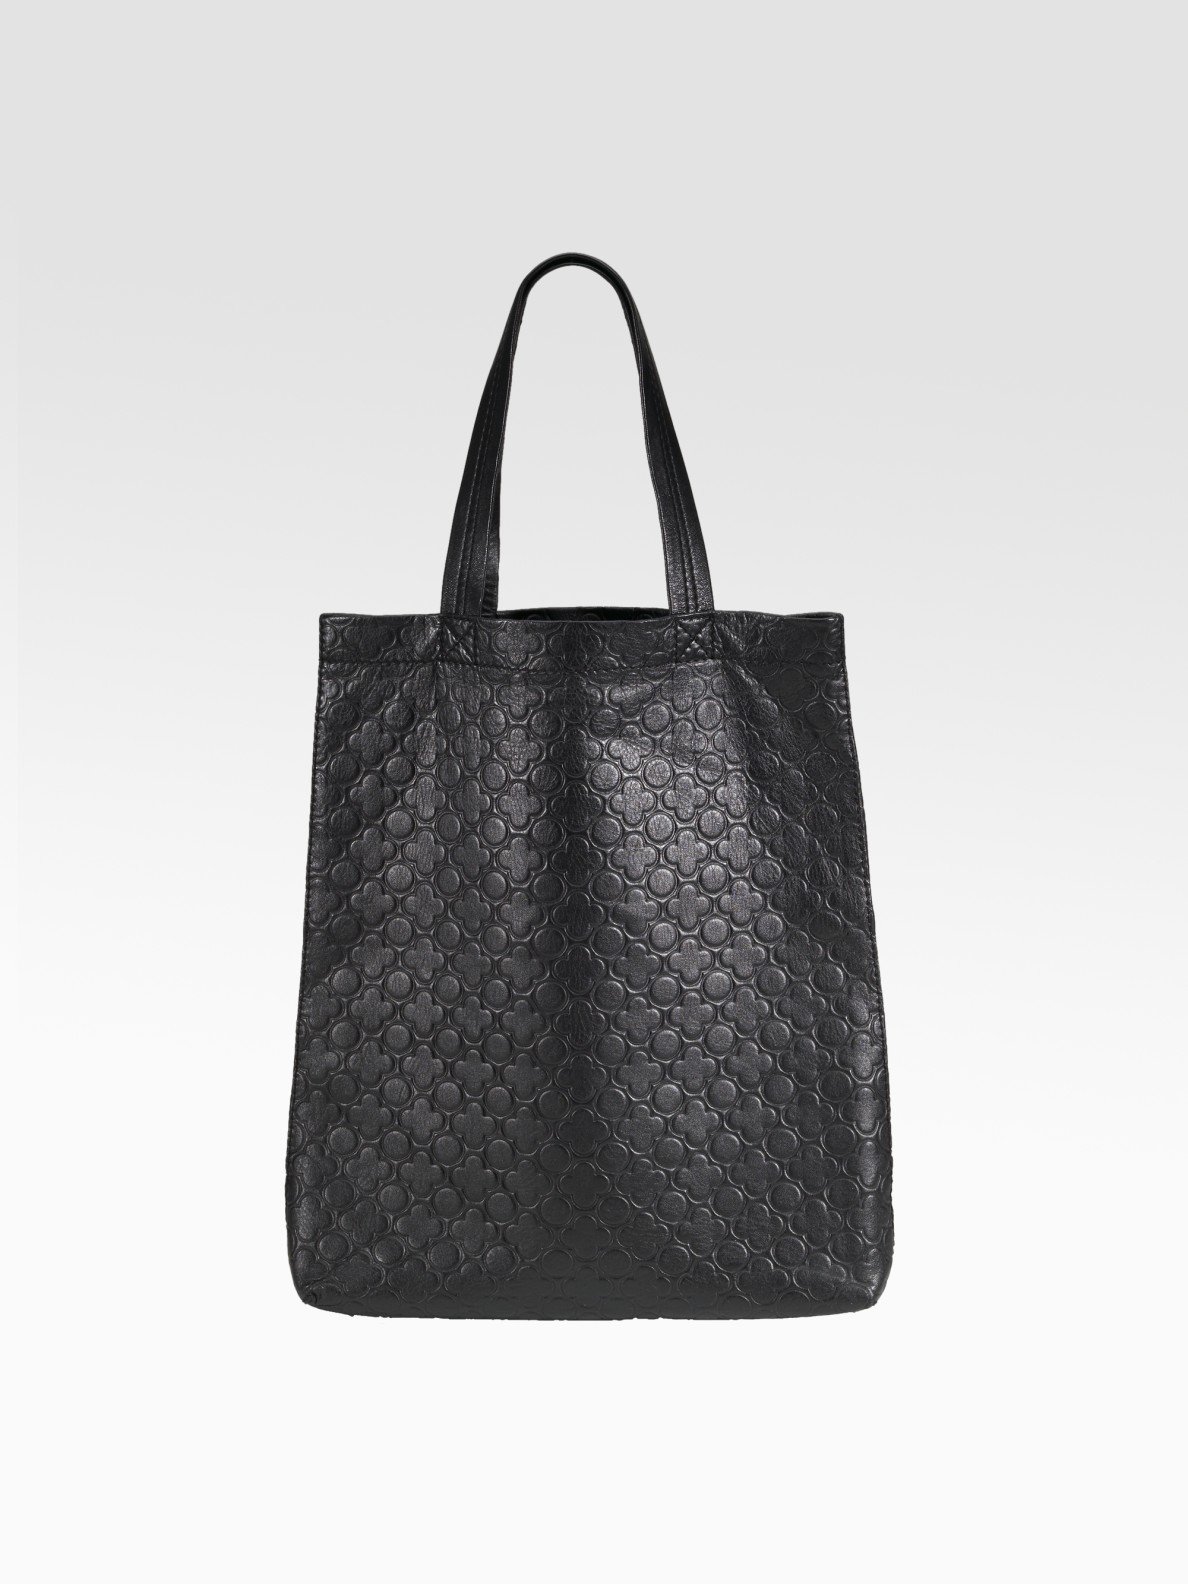 Comme Des Garçons Extra Large Clover Embossed Leather Tote in Black | Lyst